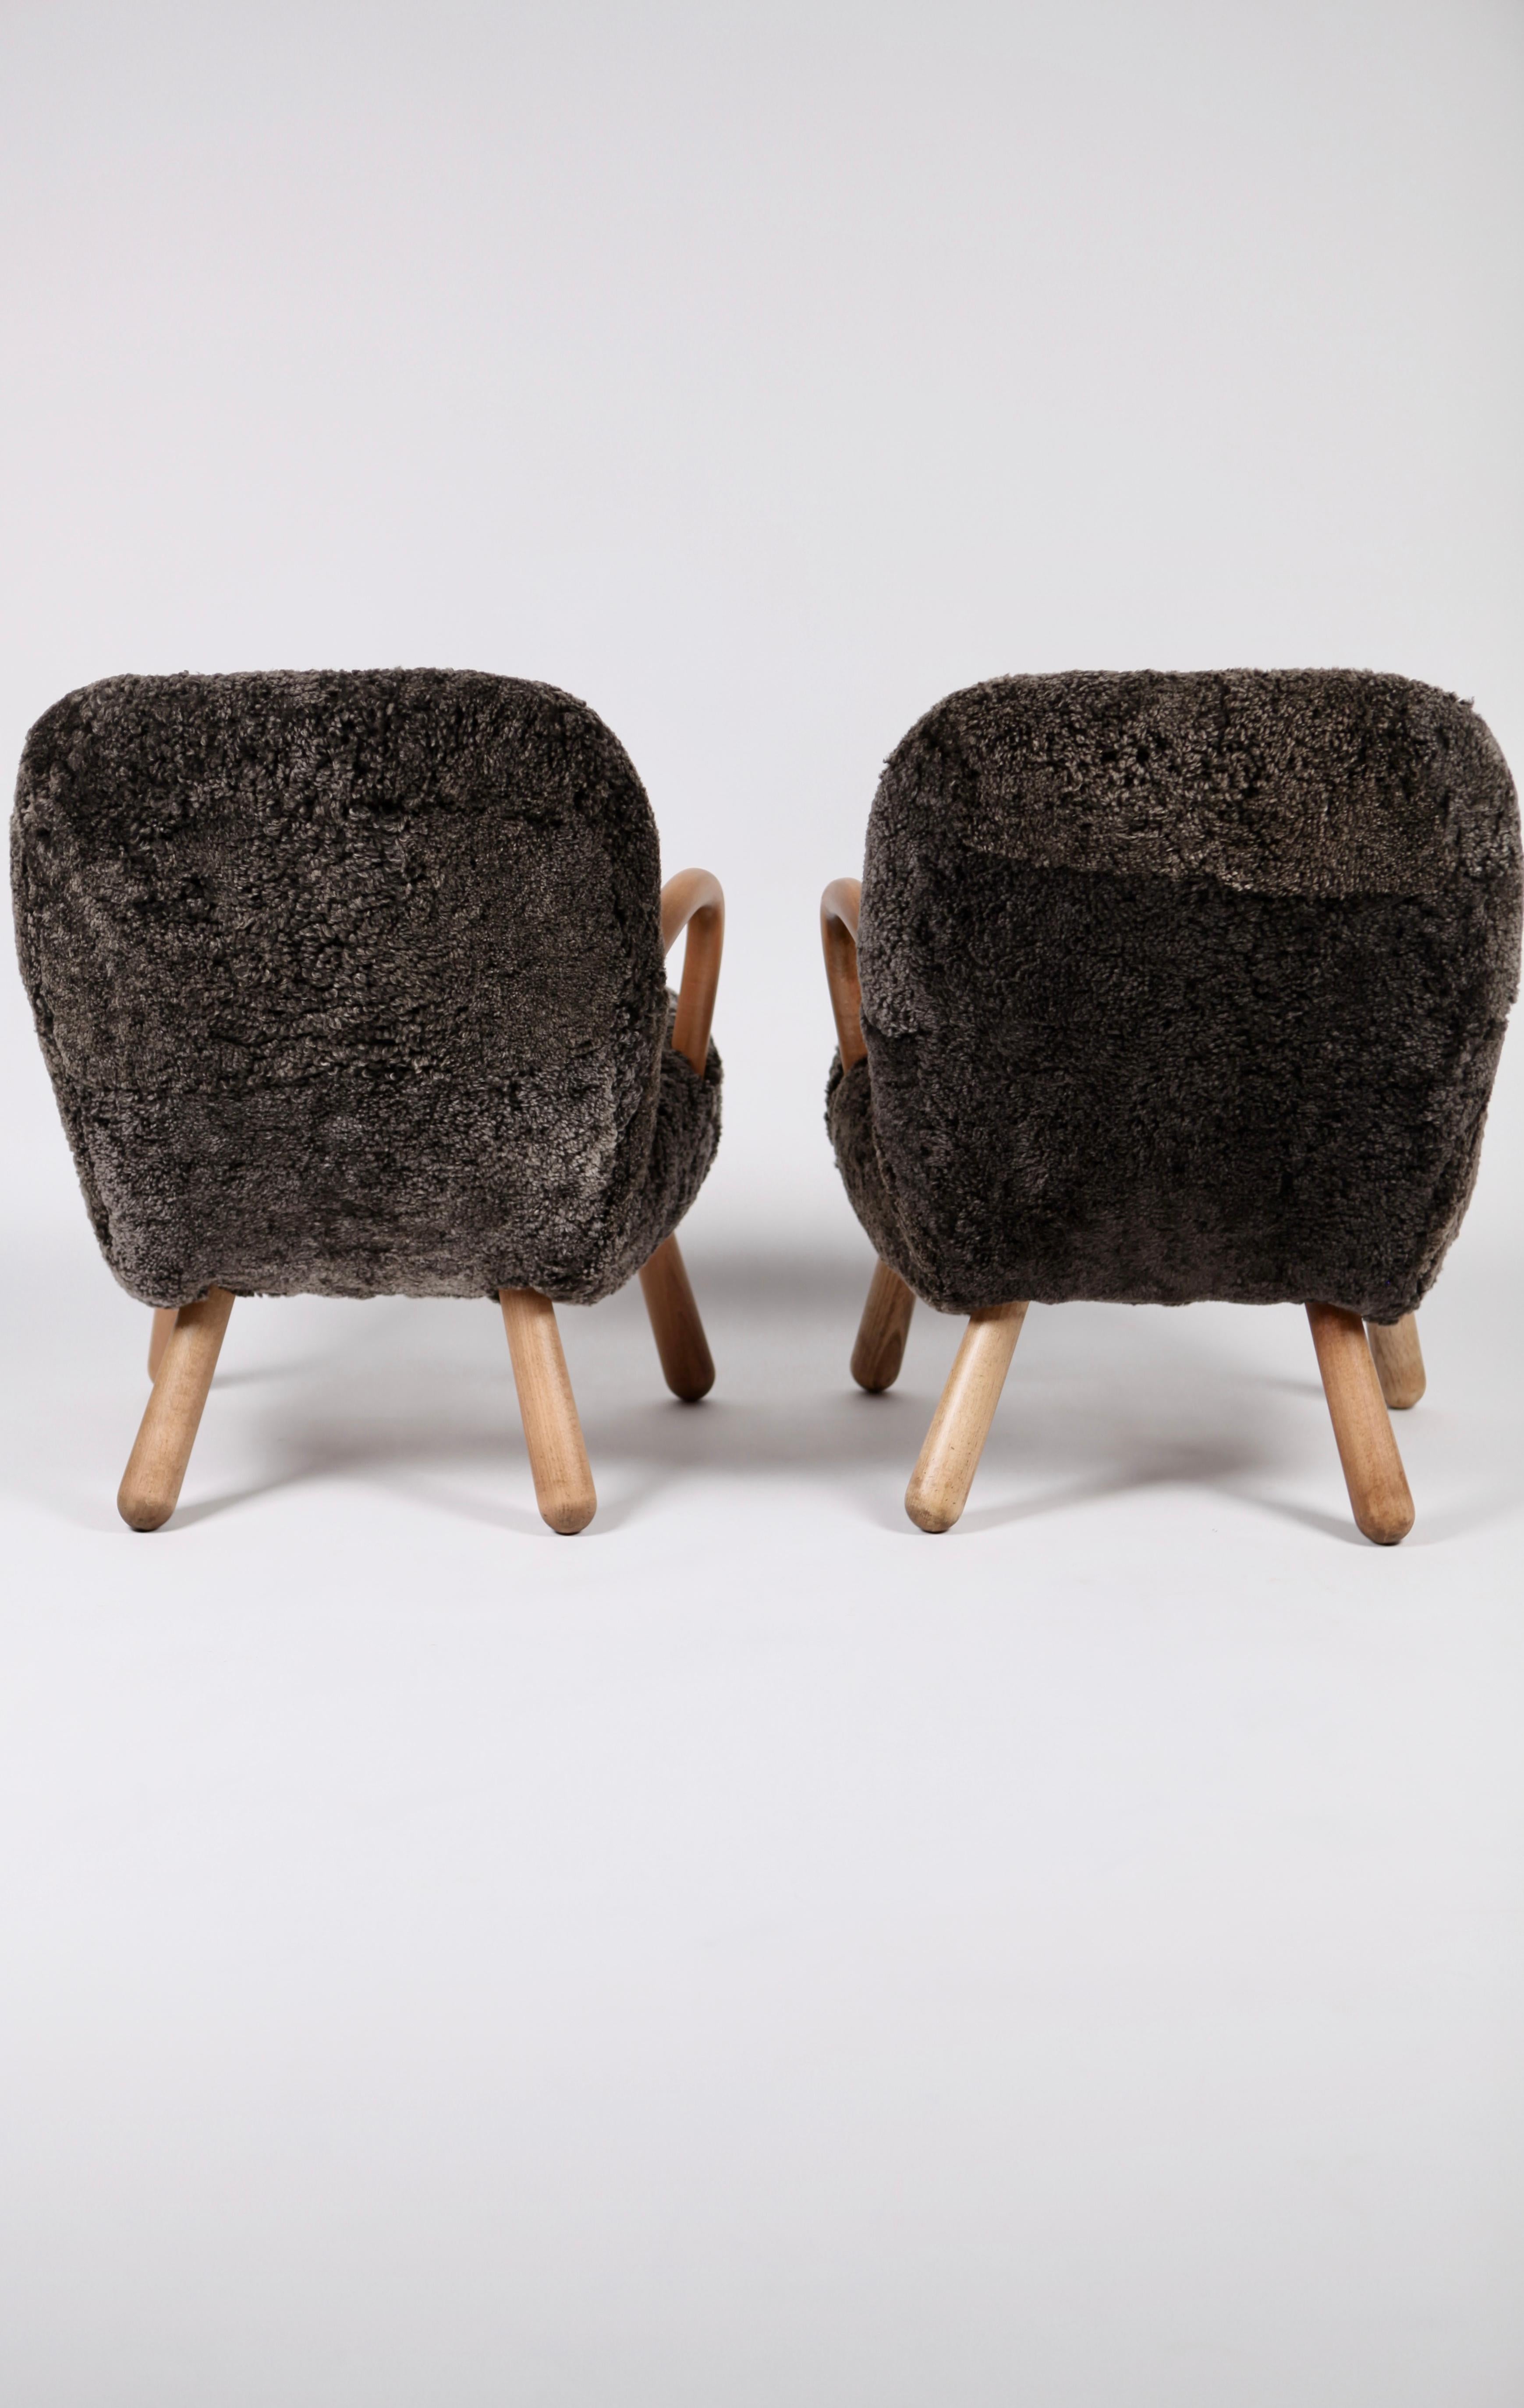 Sheepskin Pair of Philip Arctander Attributed Clam Chairs, 1950s